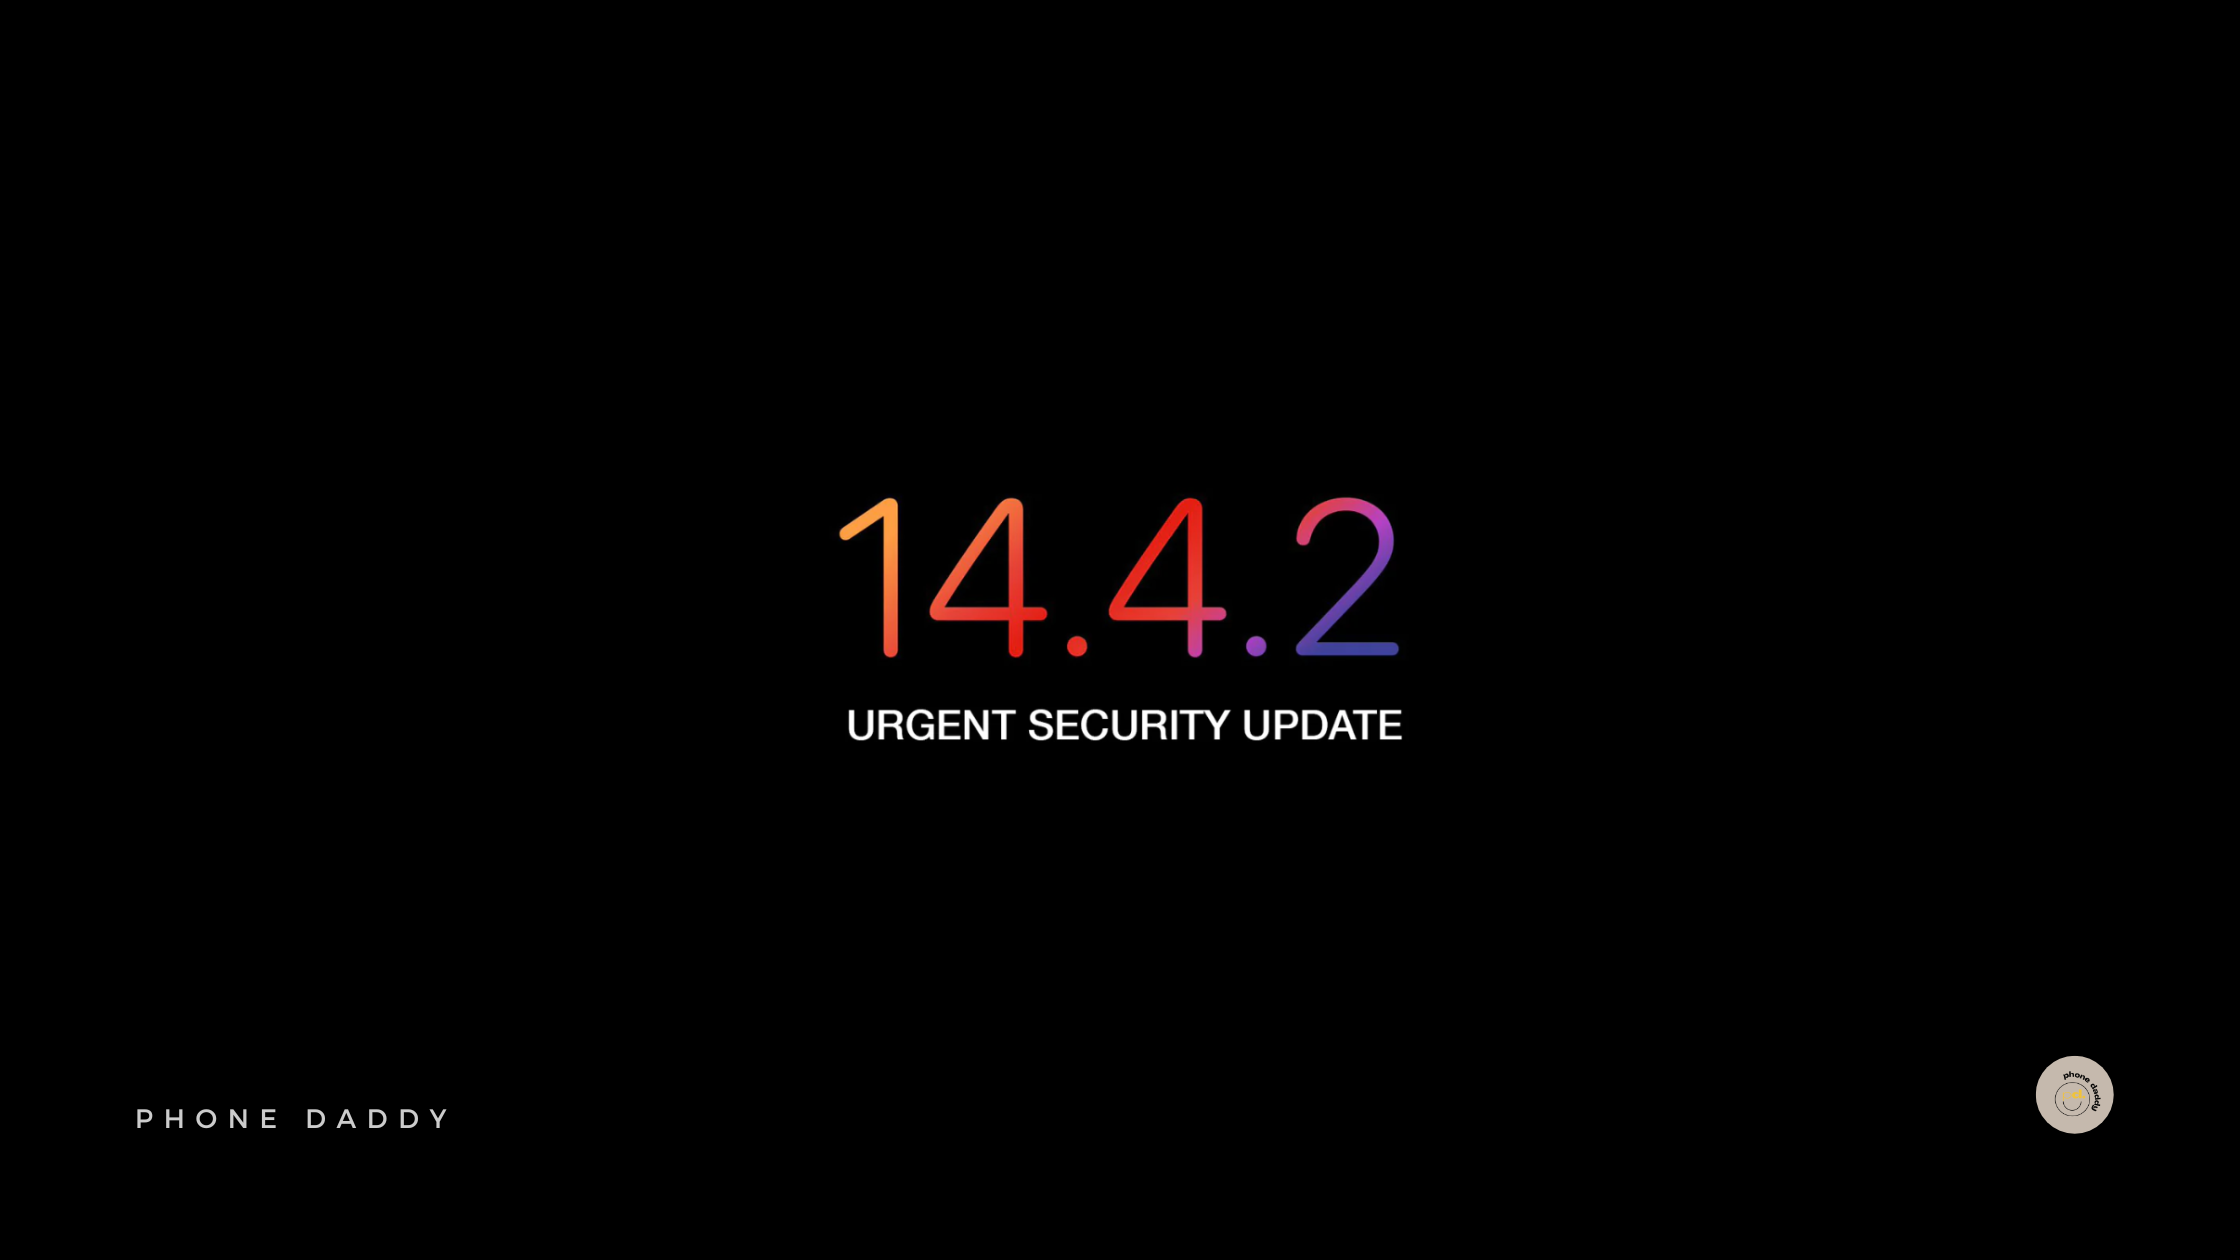 Apple Urgently Advising Users to Upgrade to iOS 14.4.2